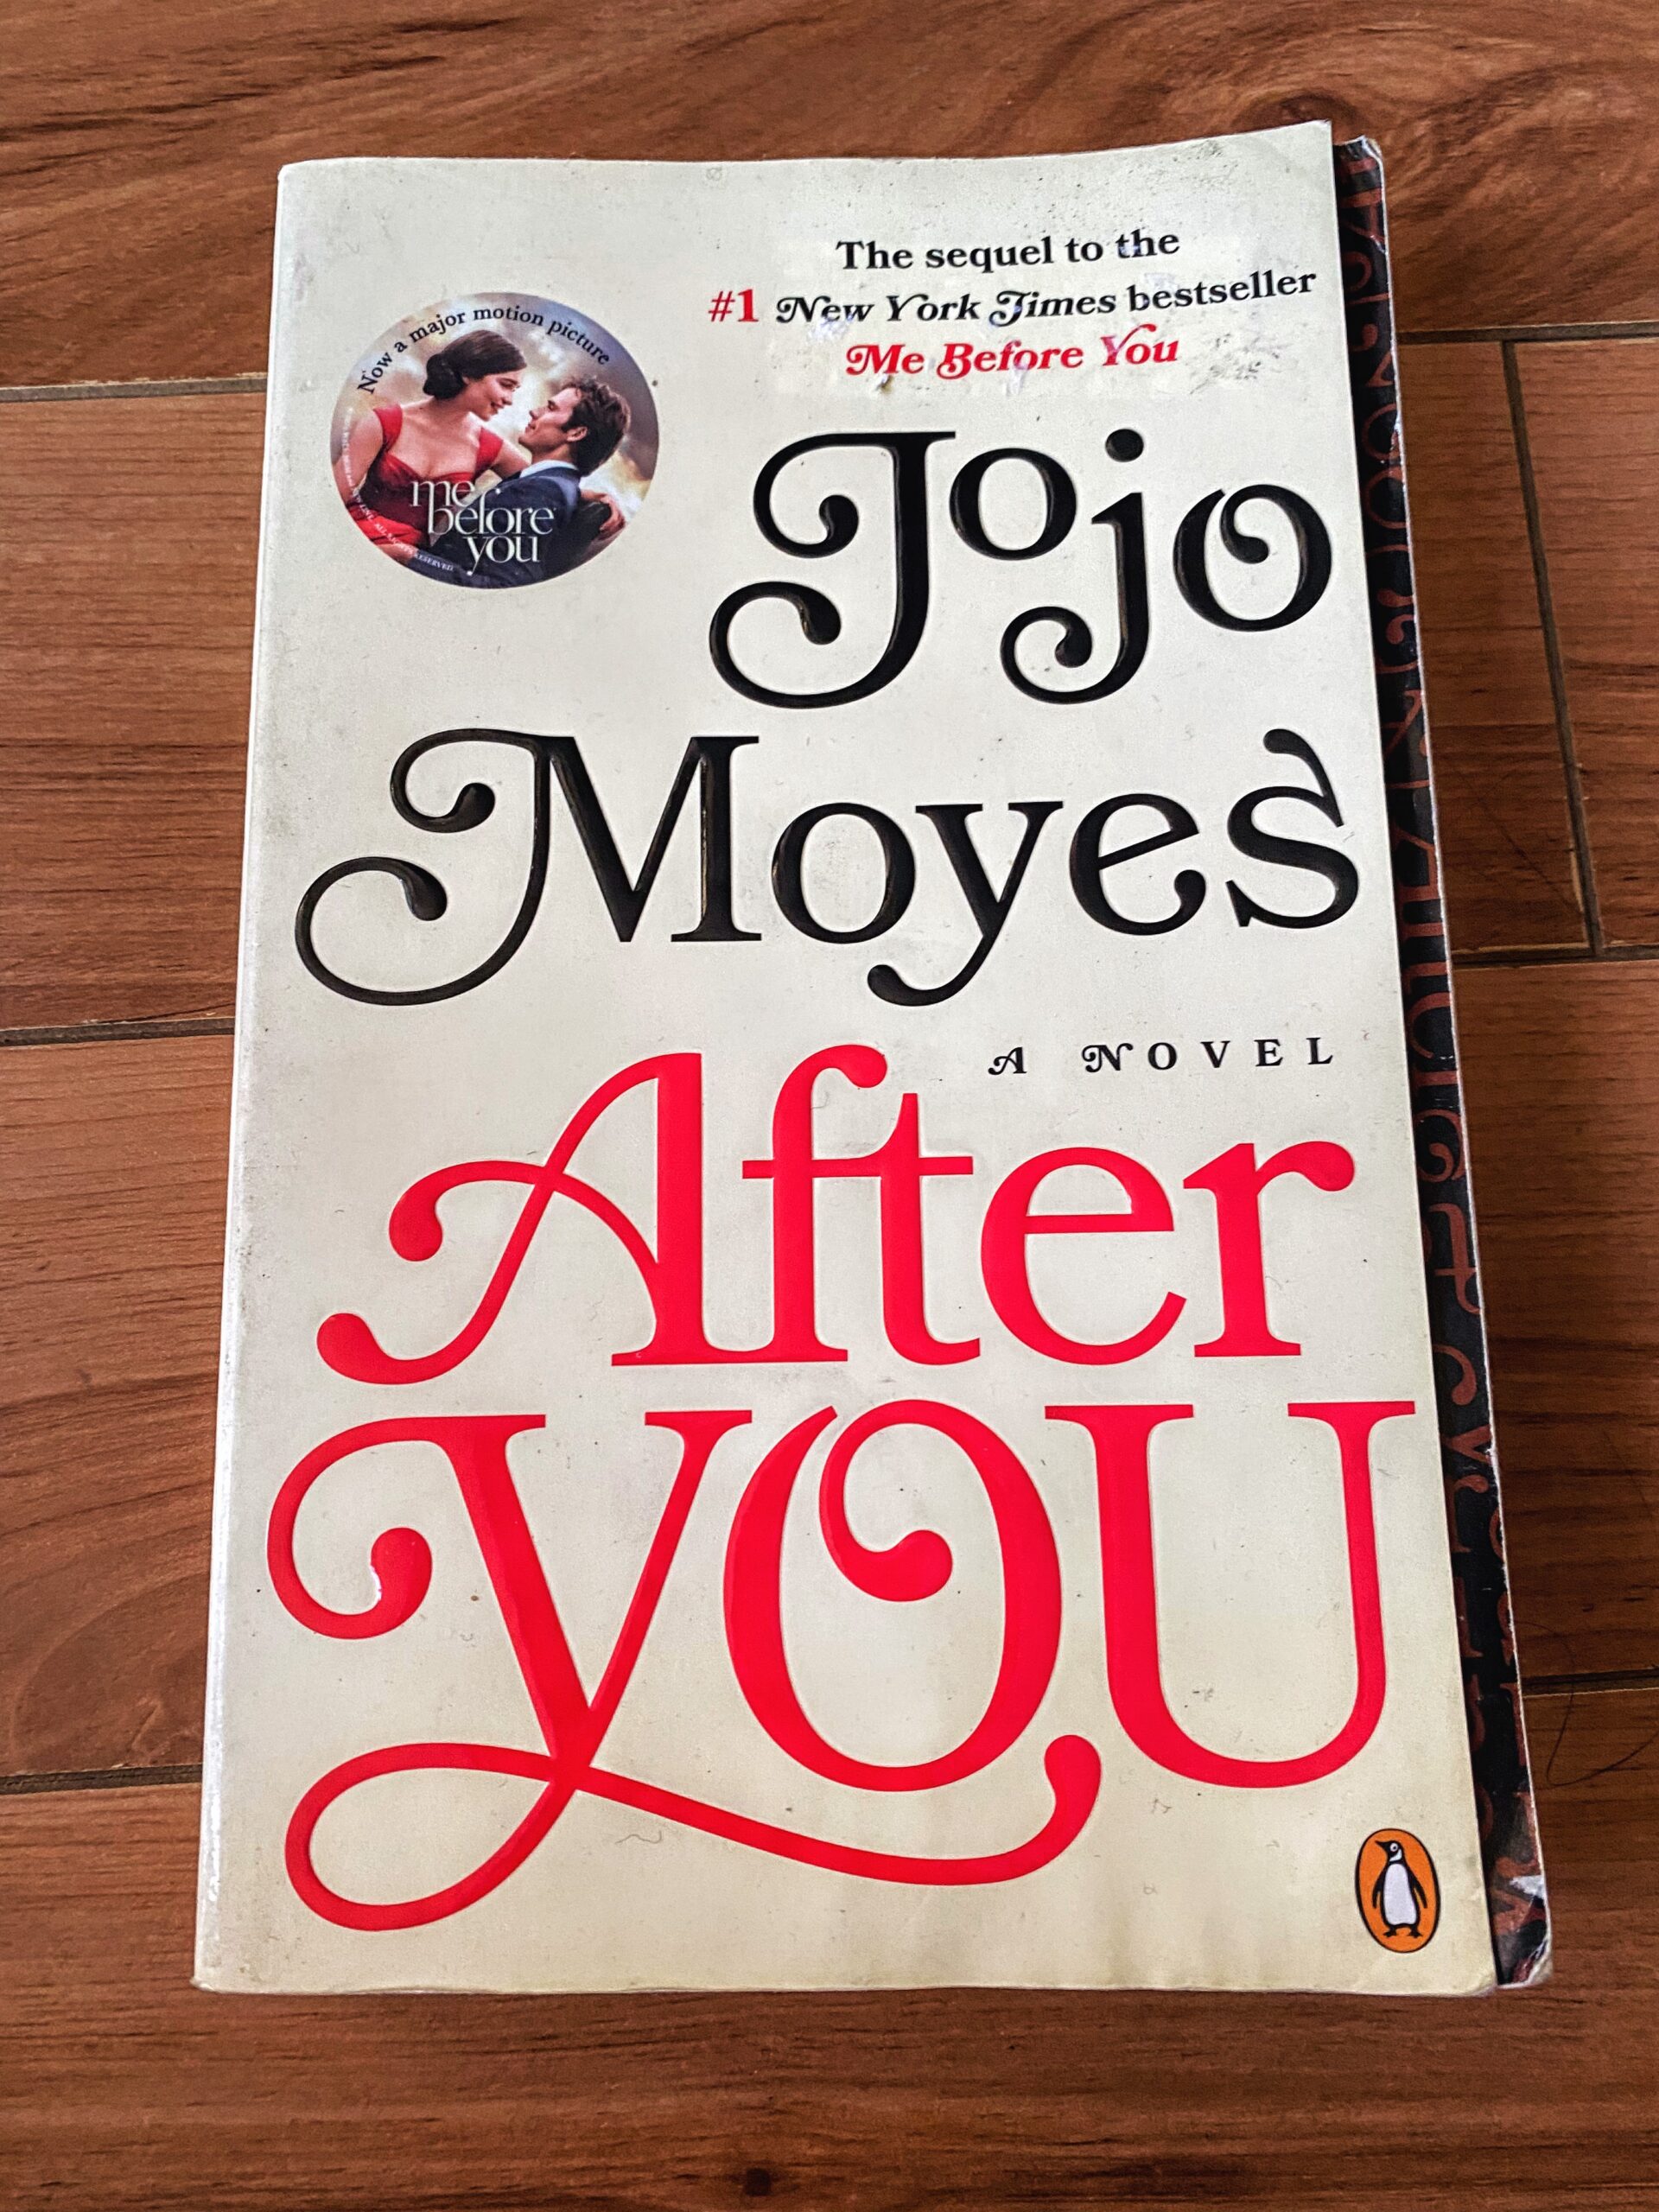 after you jojo moyes